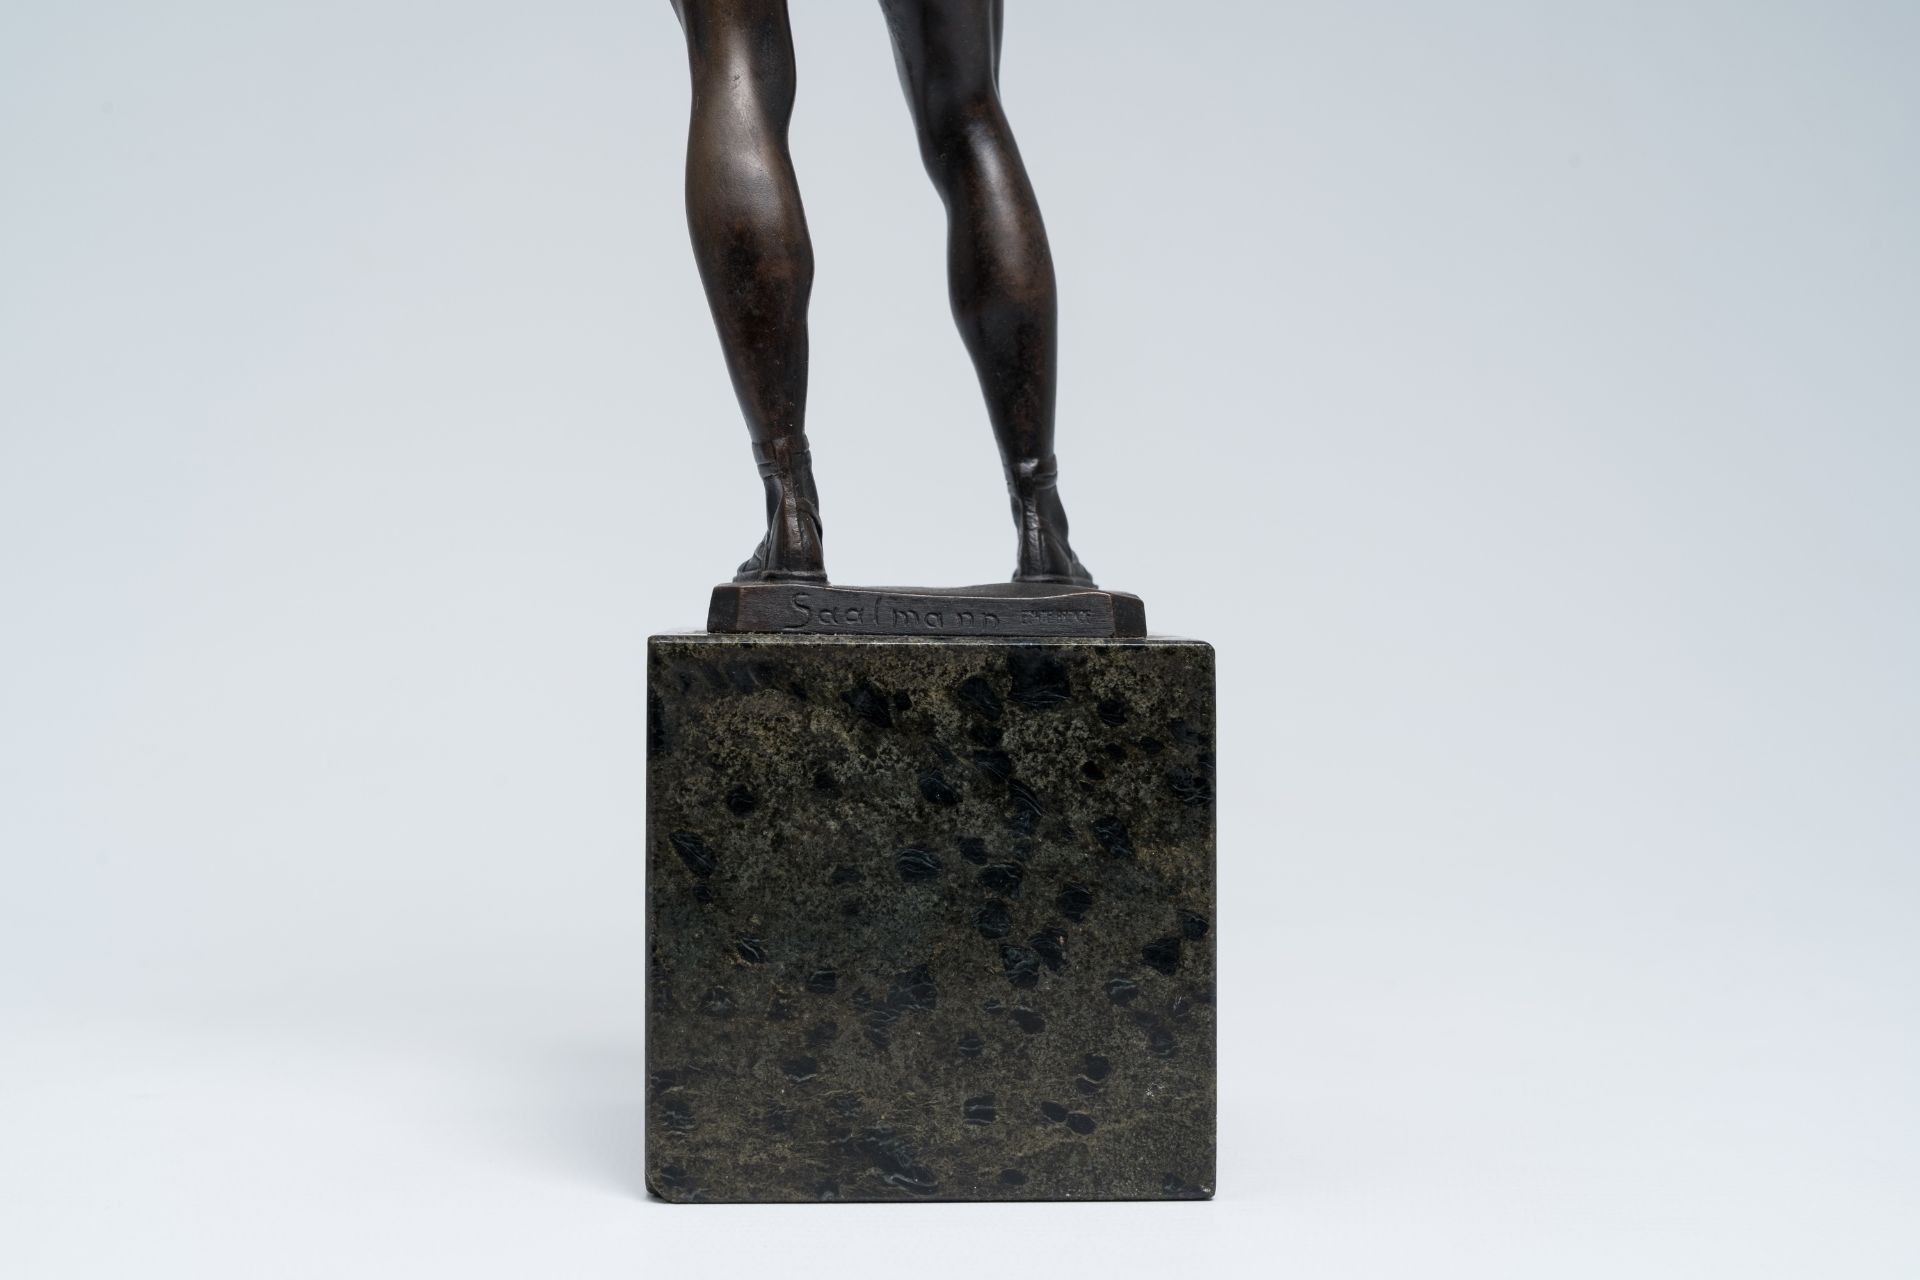 Erich Saalmann (act. 1918-1932): The autopilot, patinated bronze on a marble base - Image 8 of 8